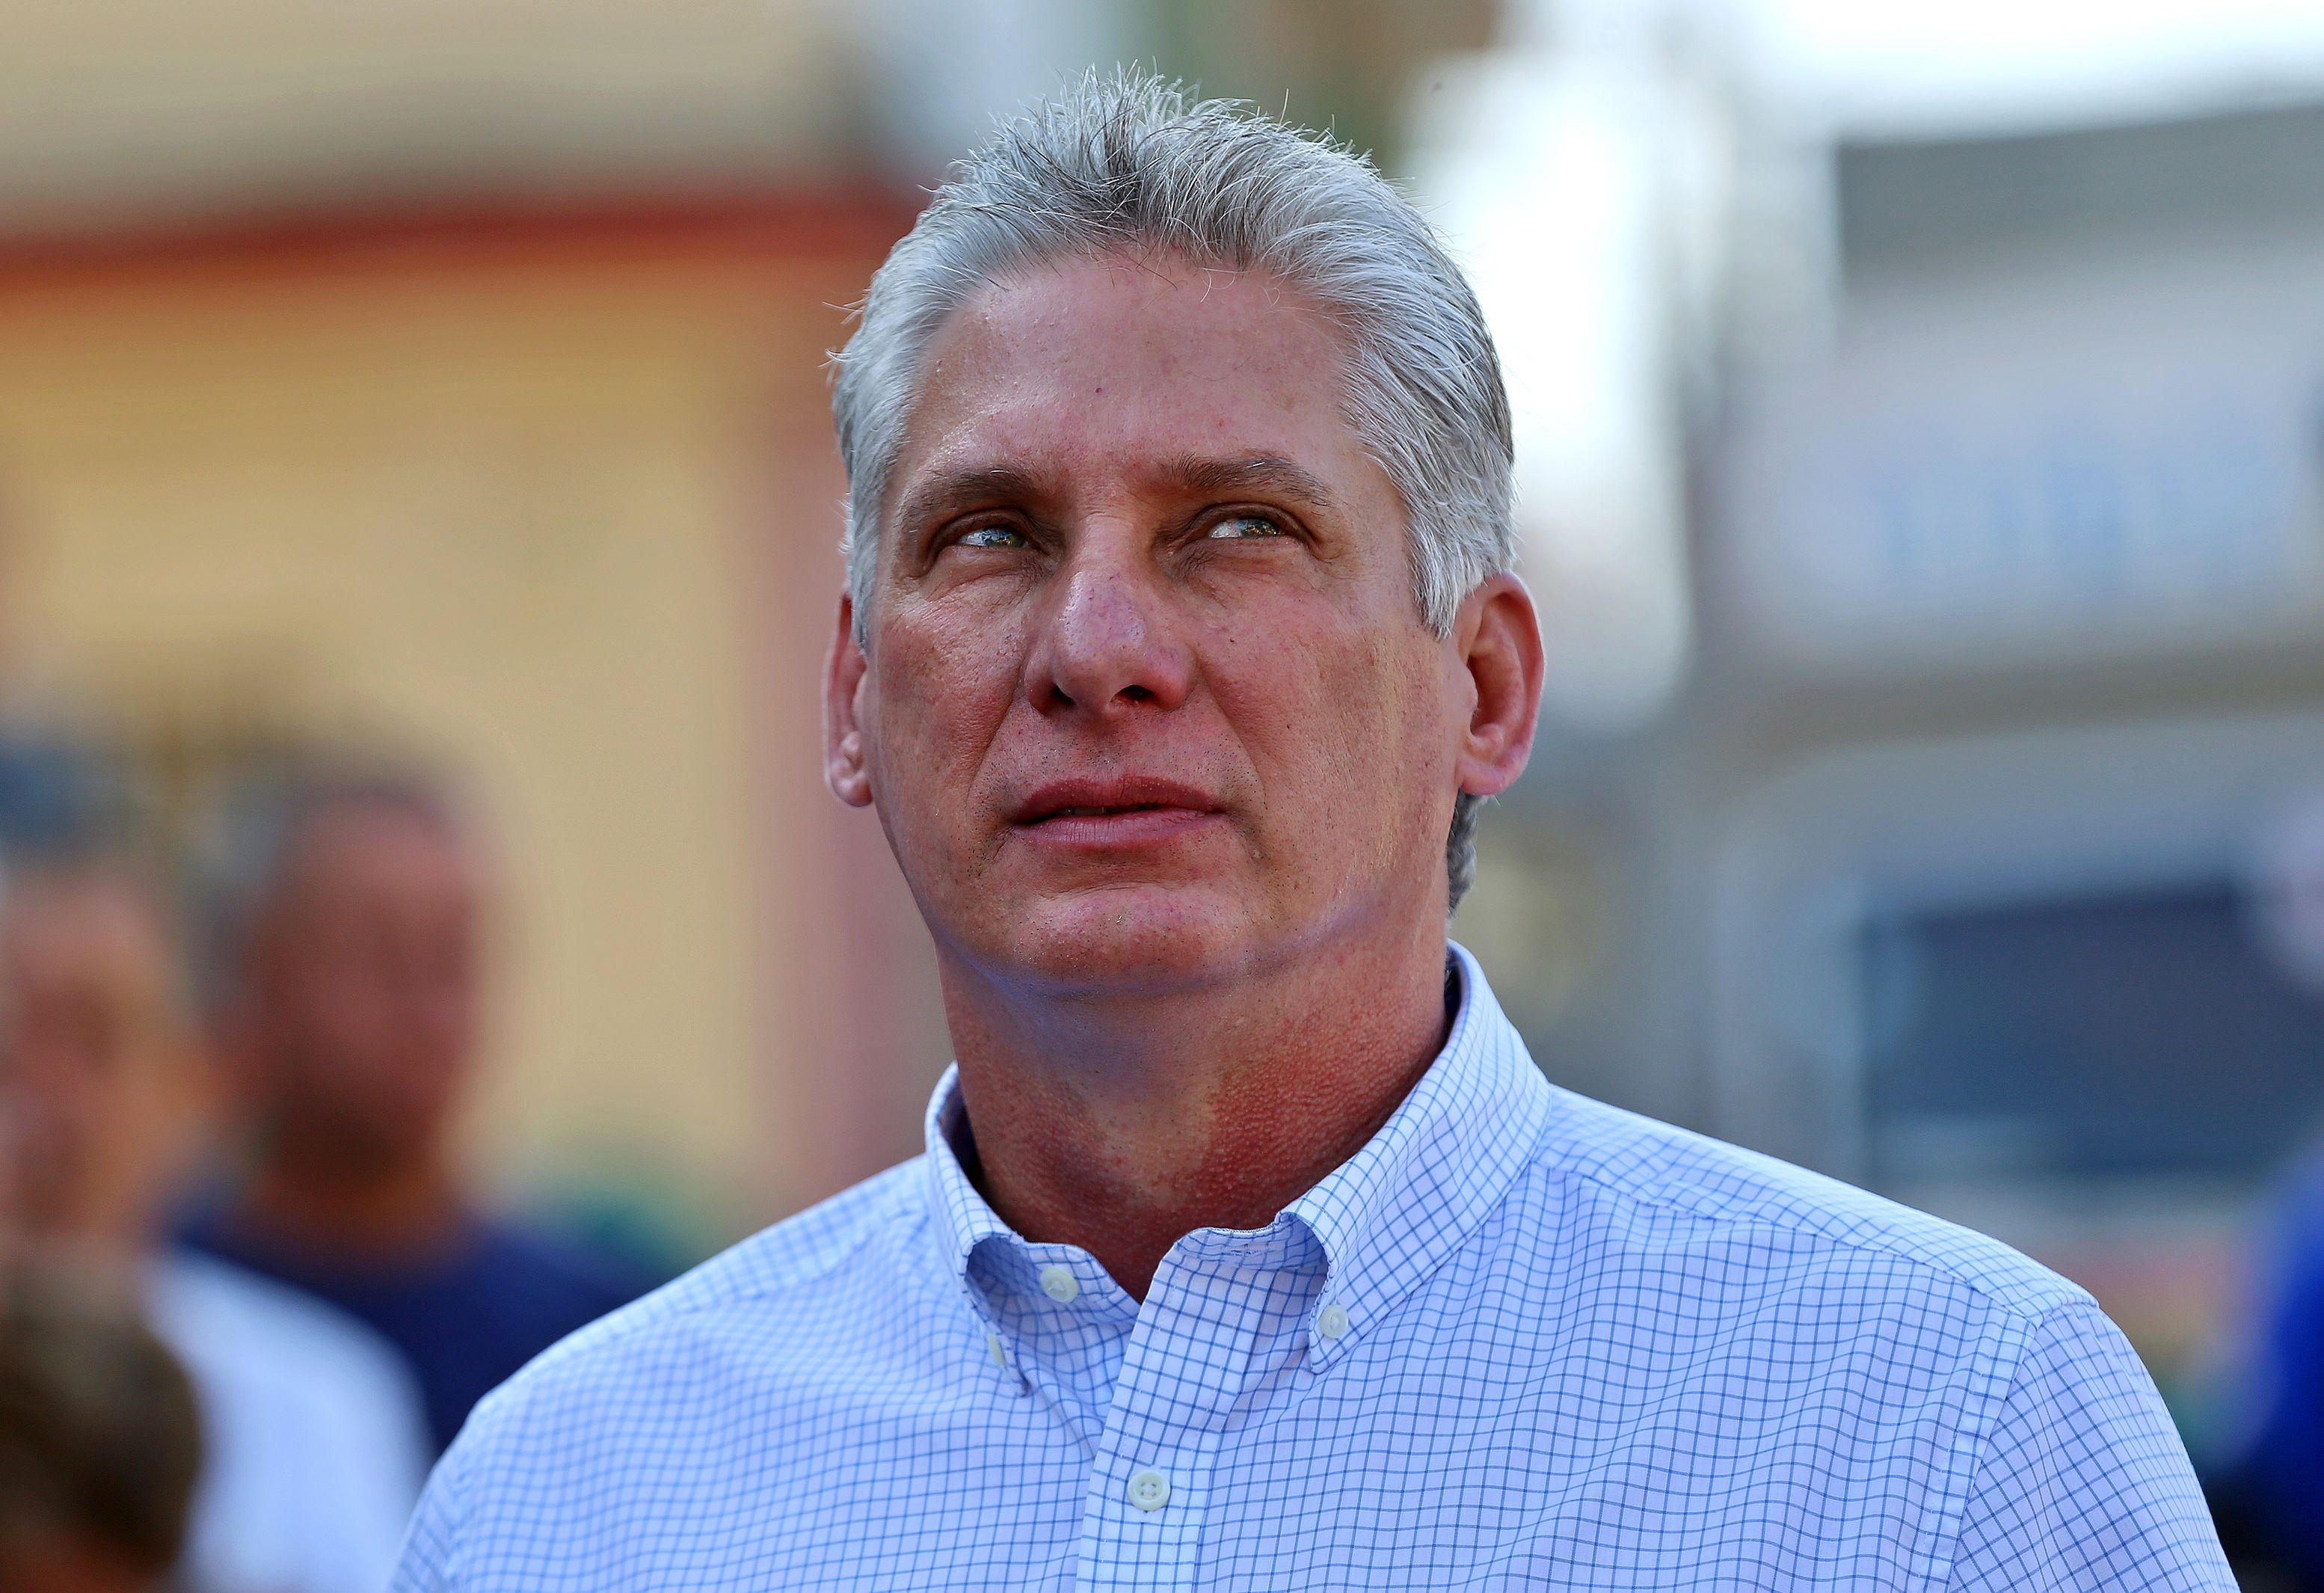 Miguel Diaz-Canel queues at a polling station in Santa Clara, Cuba, during an election to ratify a new National Assembly on March 11. Photo: AFP 